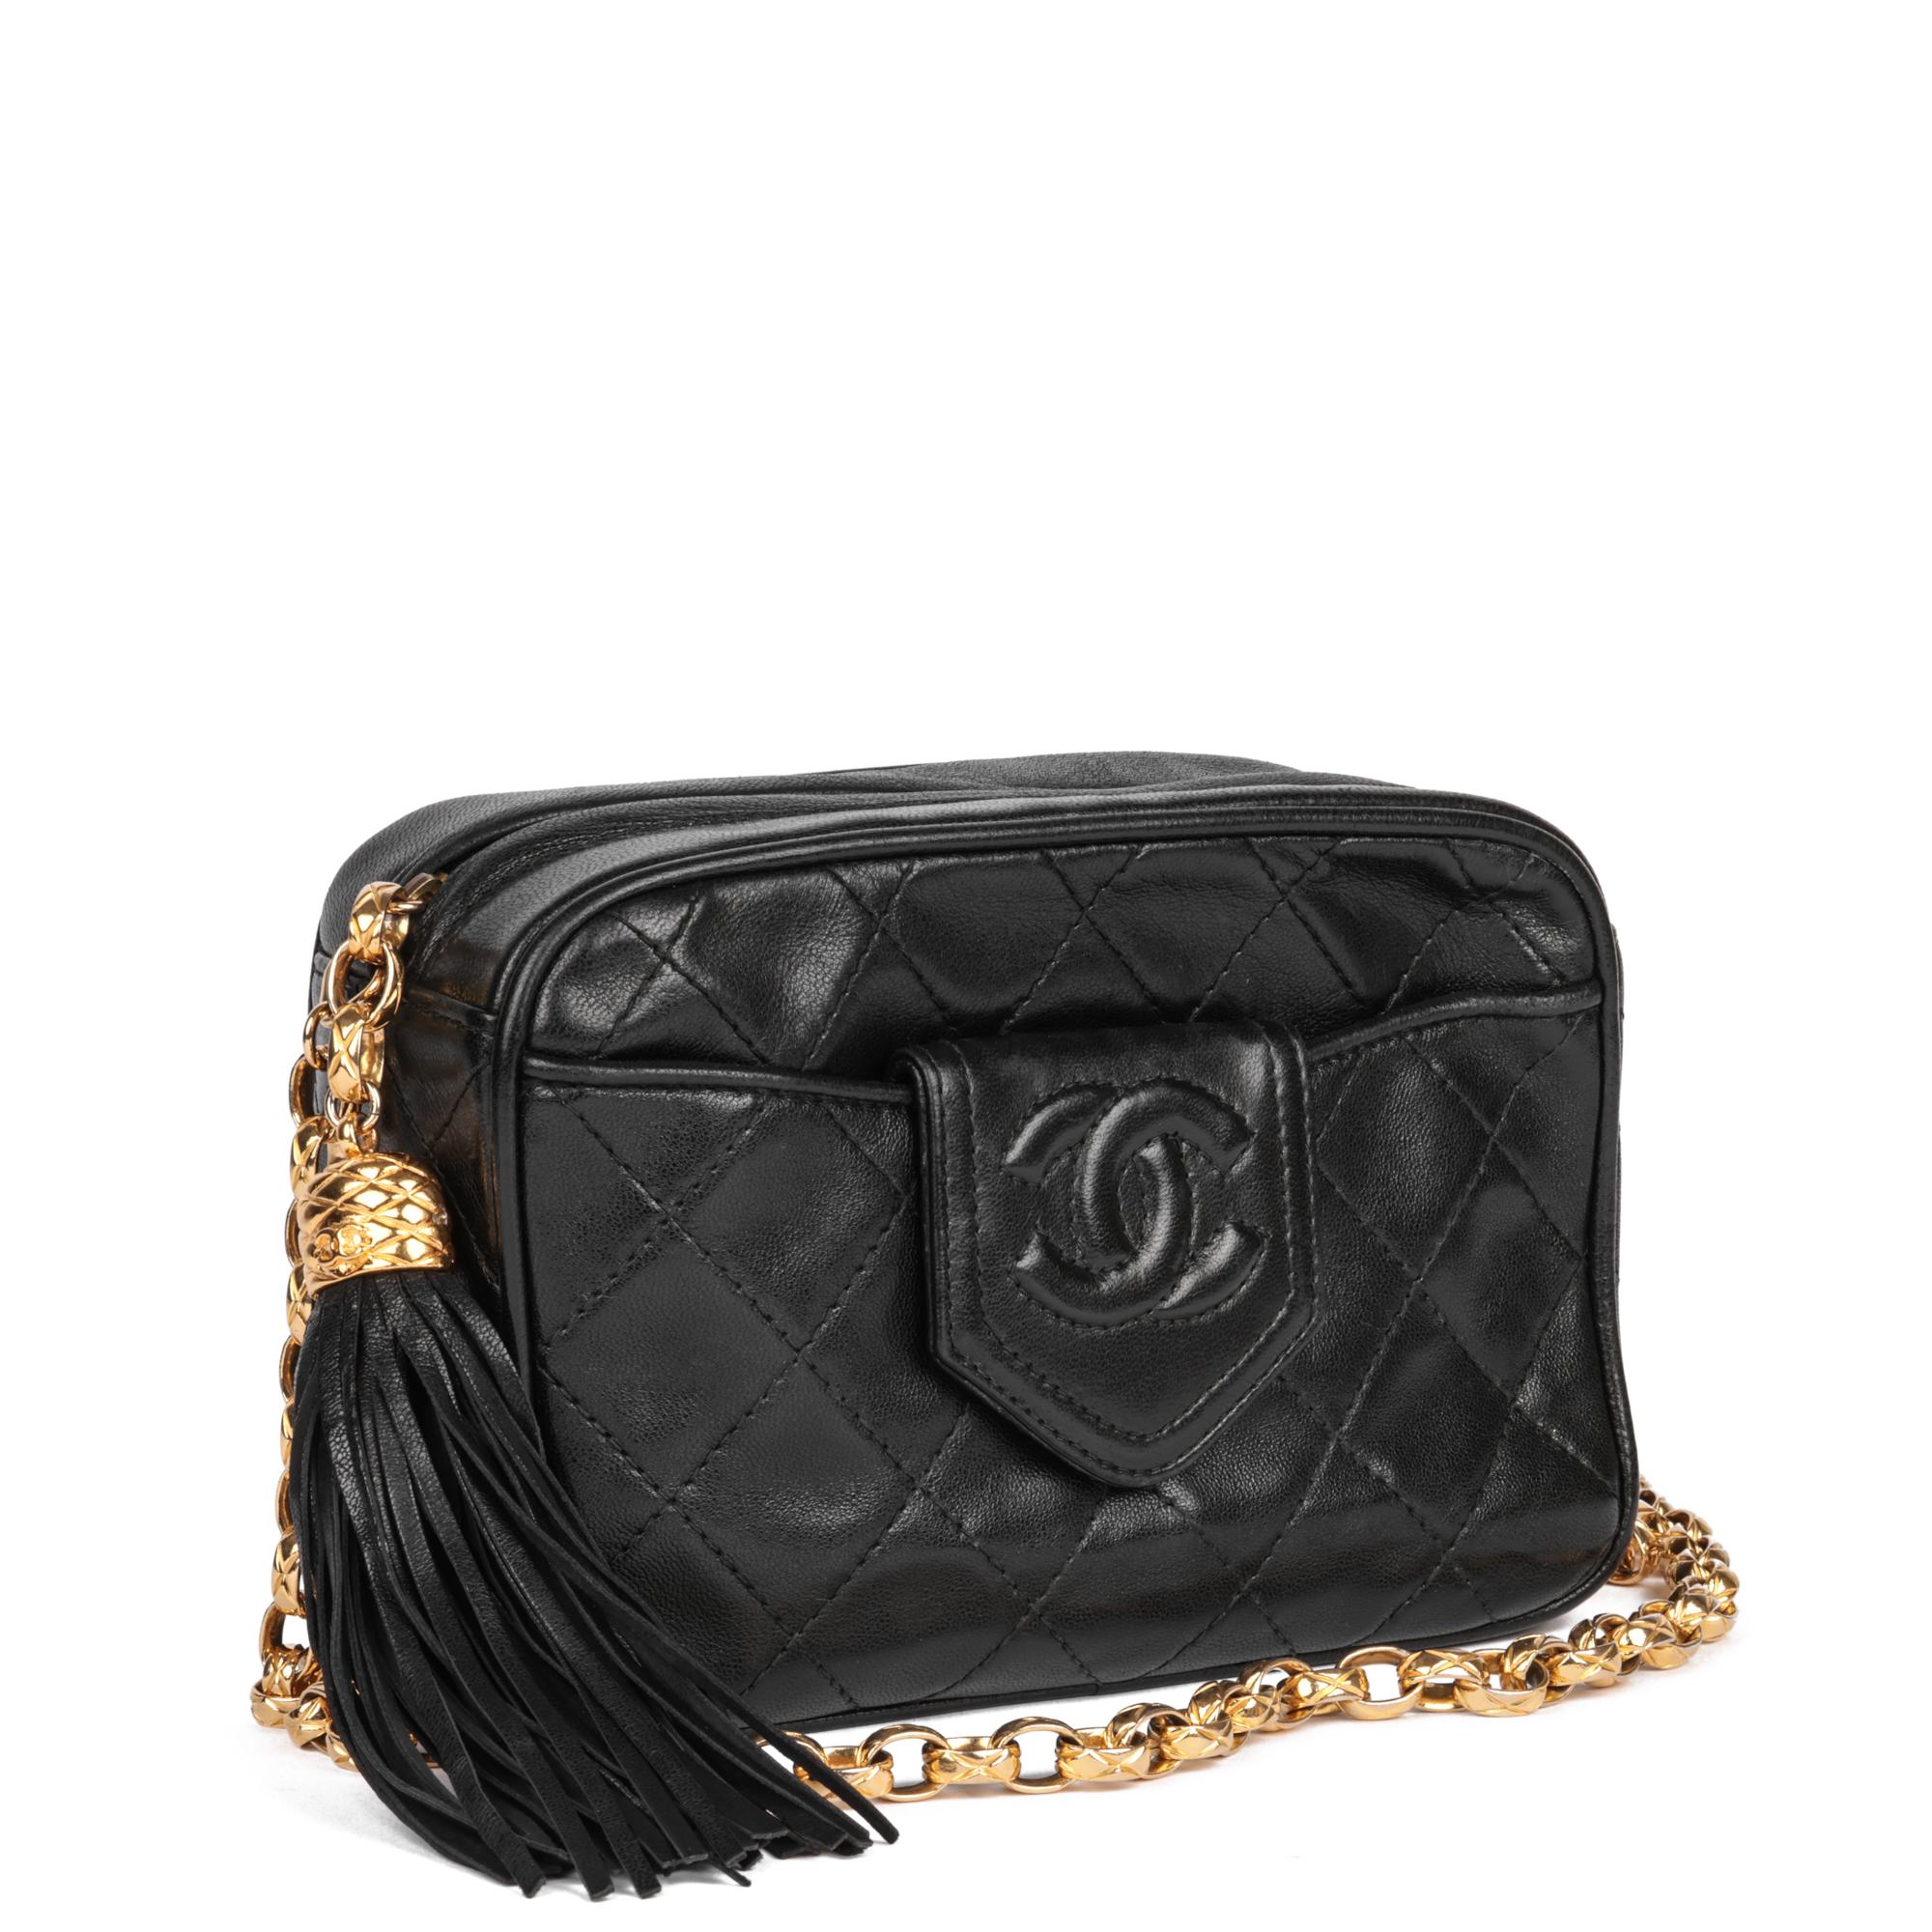 CHANEL
Black Quilted Lambskin Vintage Mini Fringe Timeless Camera Bag

Xupes Reference: HB5238
Serial Number: 1732316
Age (Circa): 1990
Accompanied By: Chanel Dust Bag, Authenticity Card 
Authenticity Details: Authenticity Card, Serial Sticker (Made